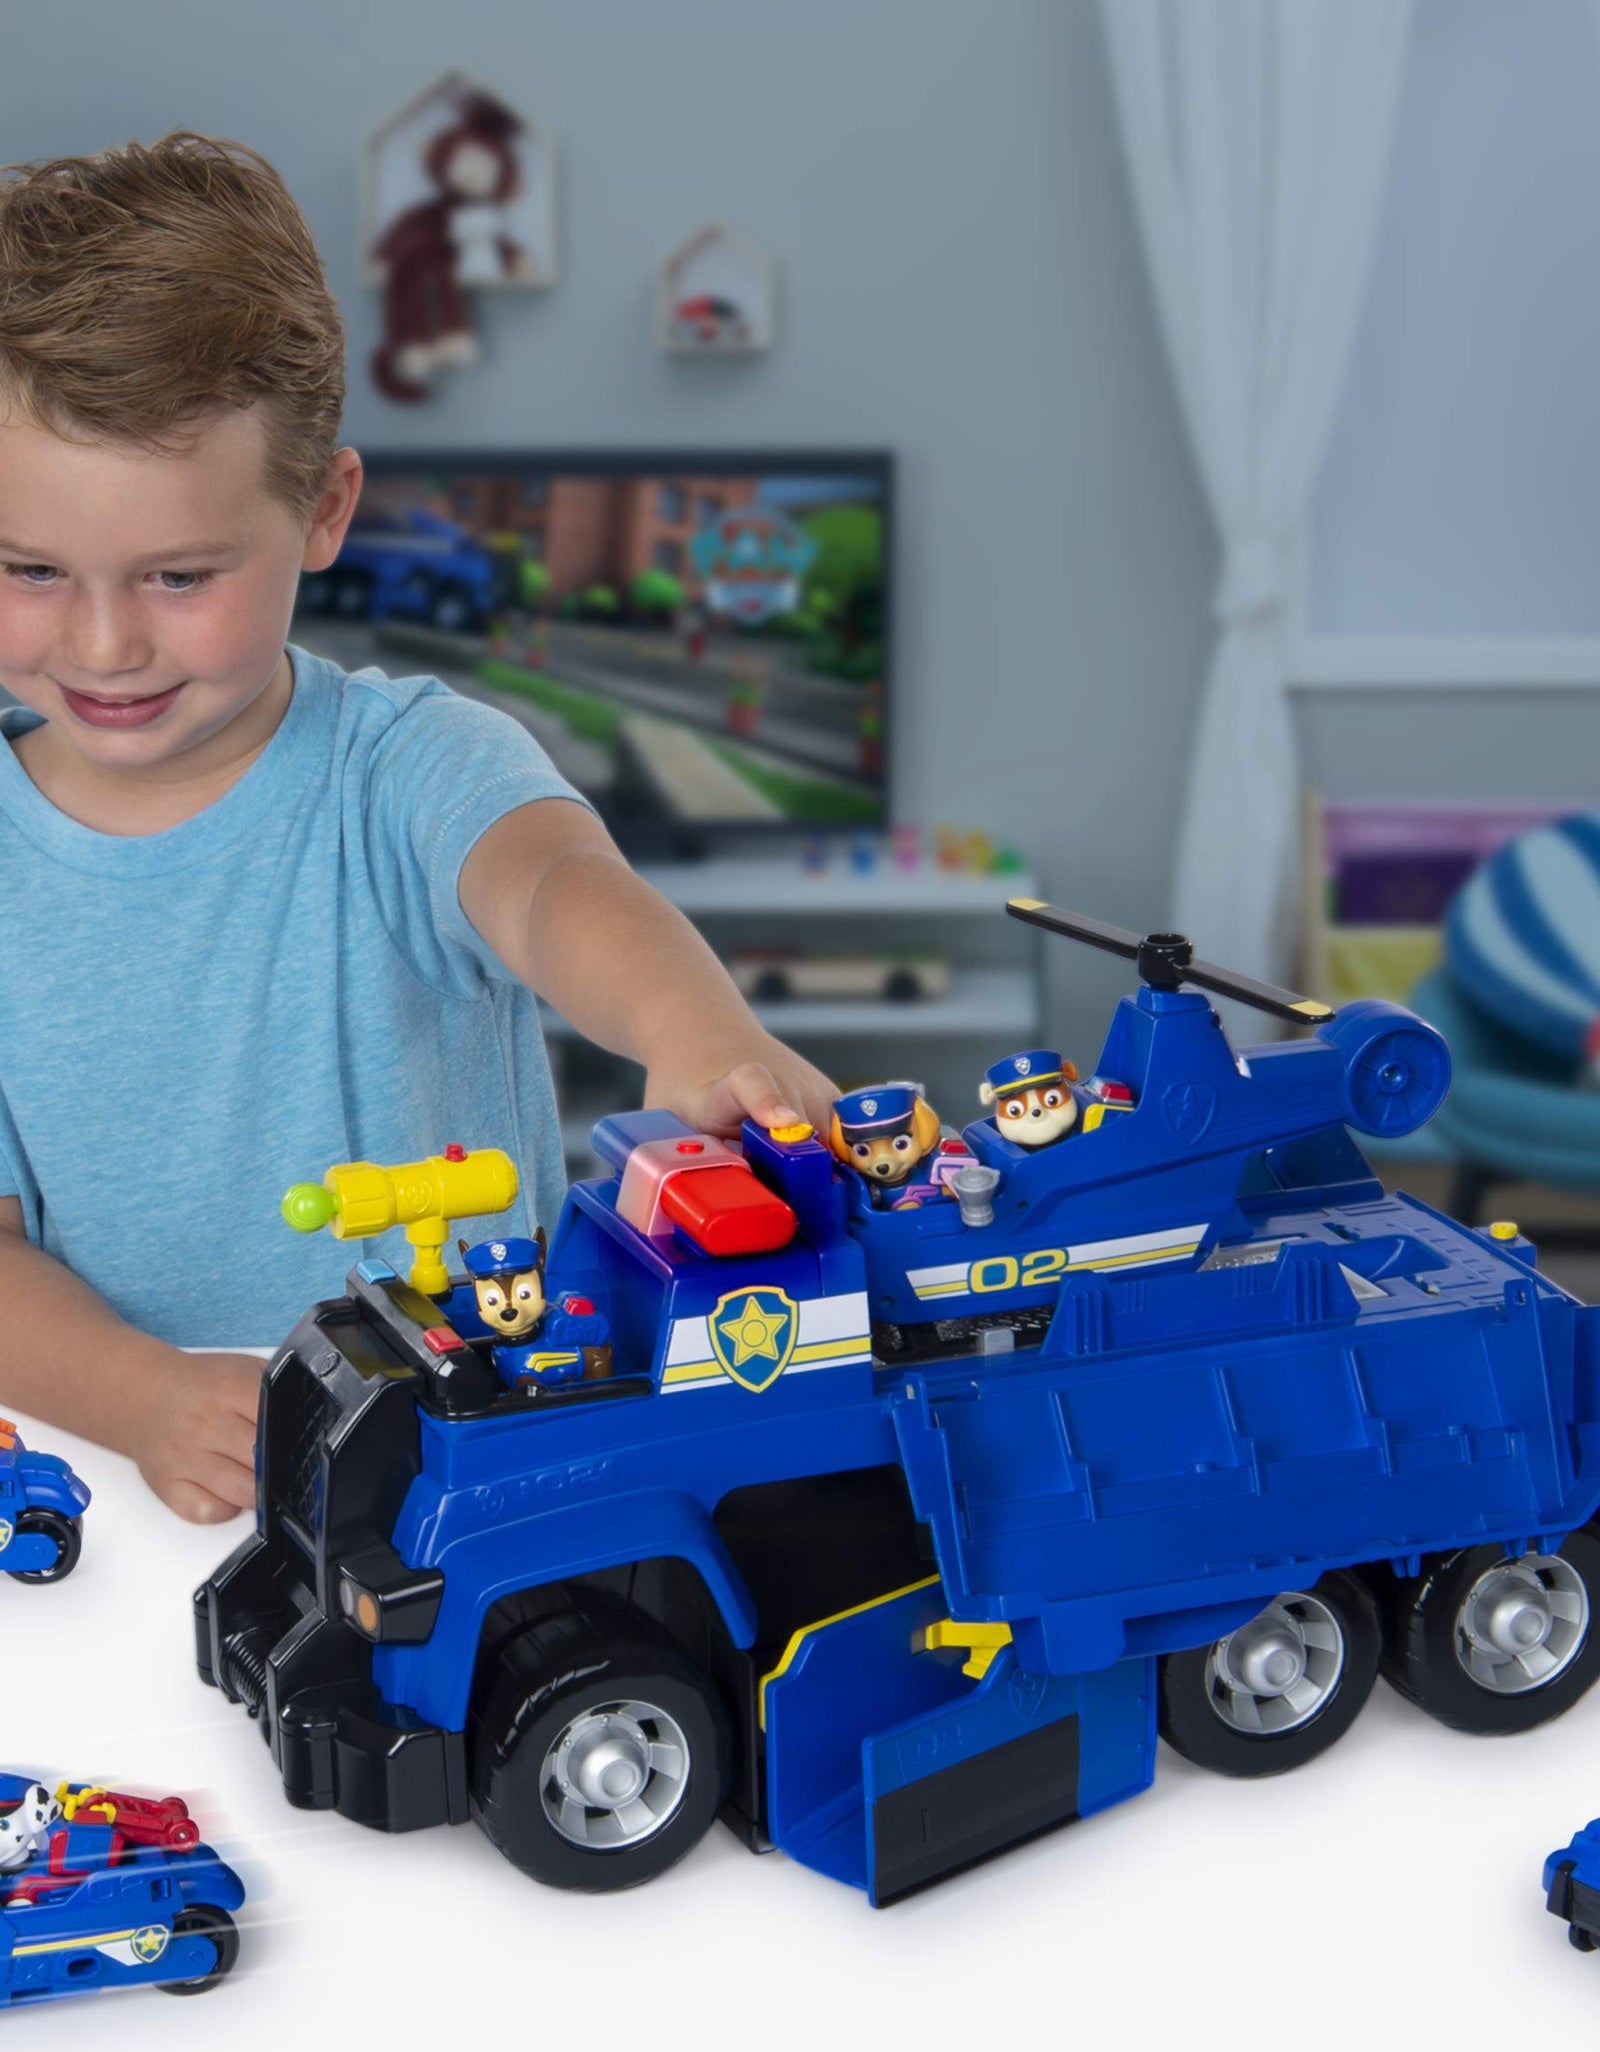 Paw Patrol, Chase’s 5-in-1 Ultimate Cruiser with Lights and Sounds, for Kids Aged 3 and up